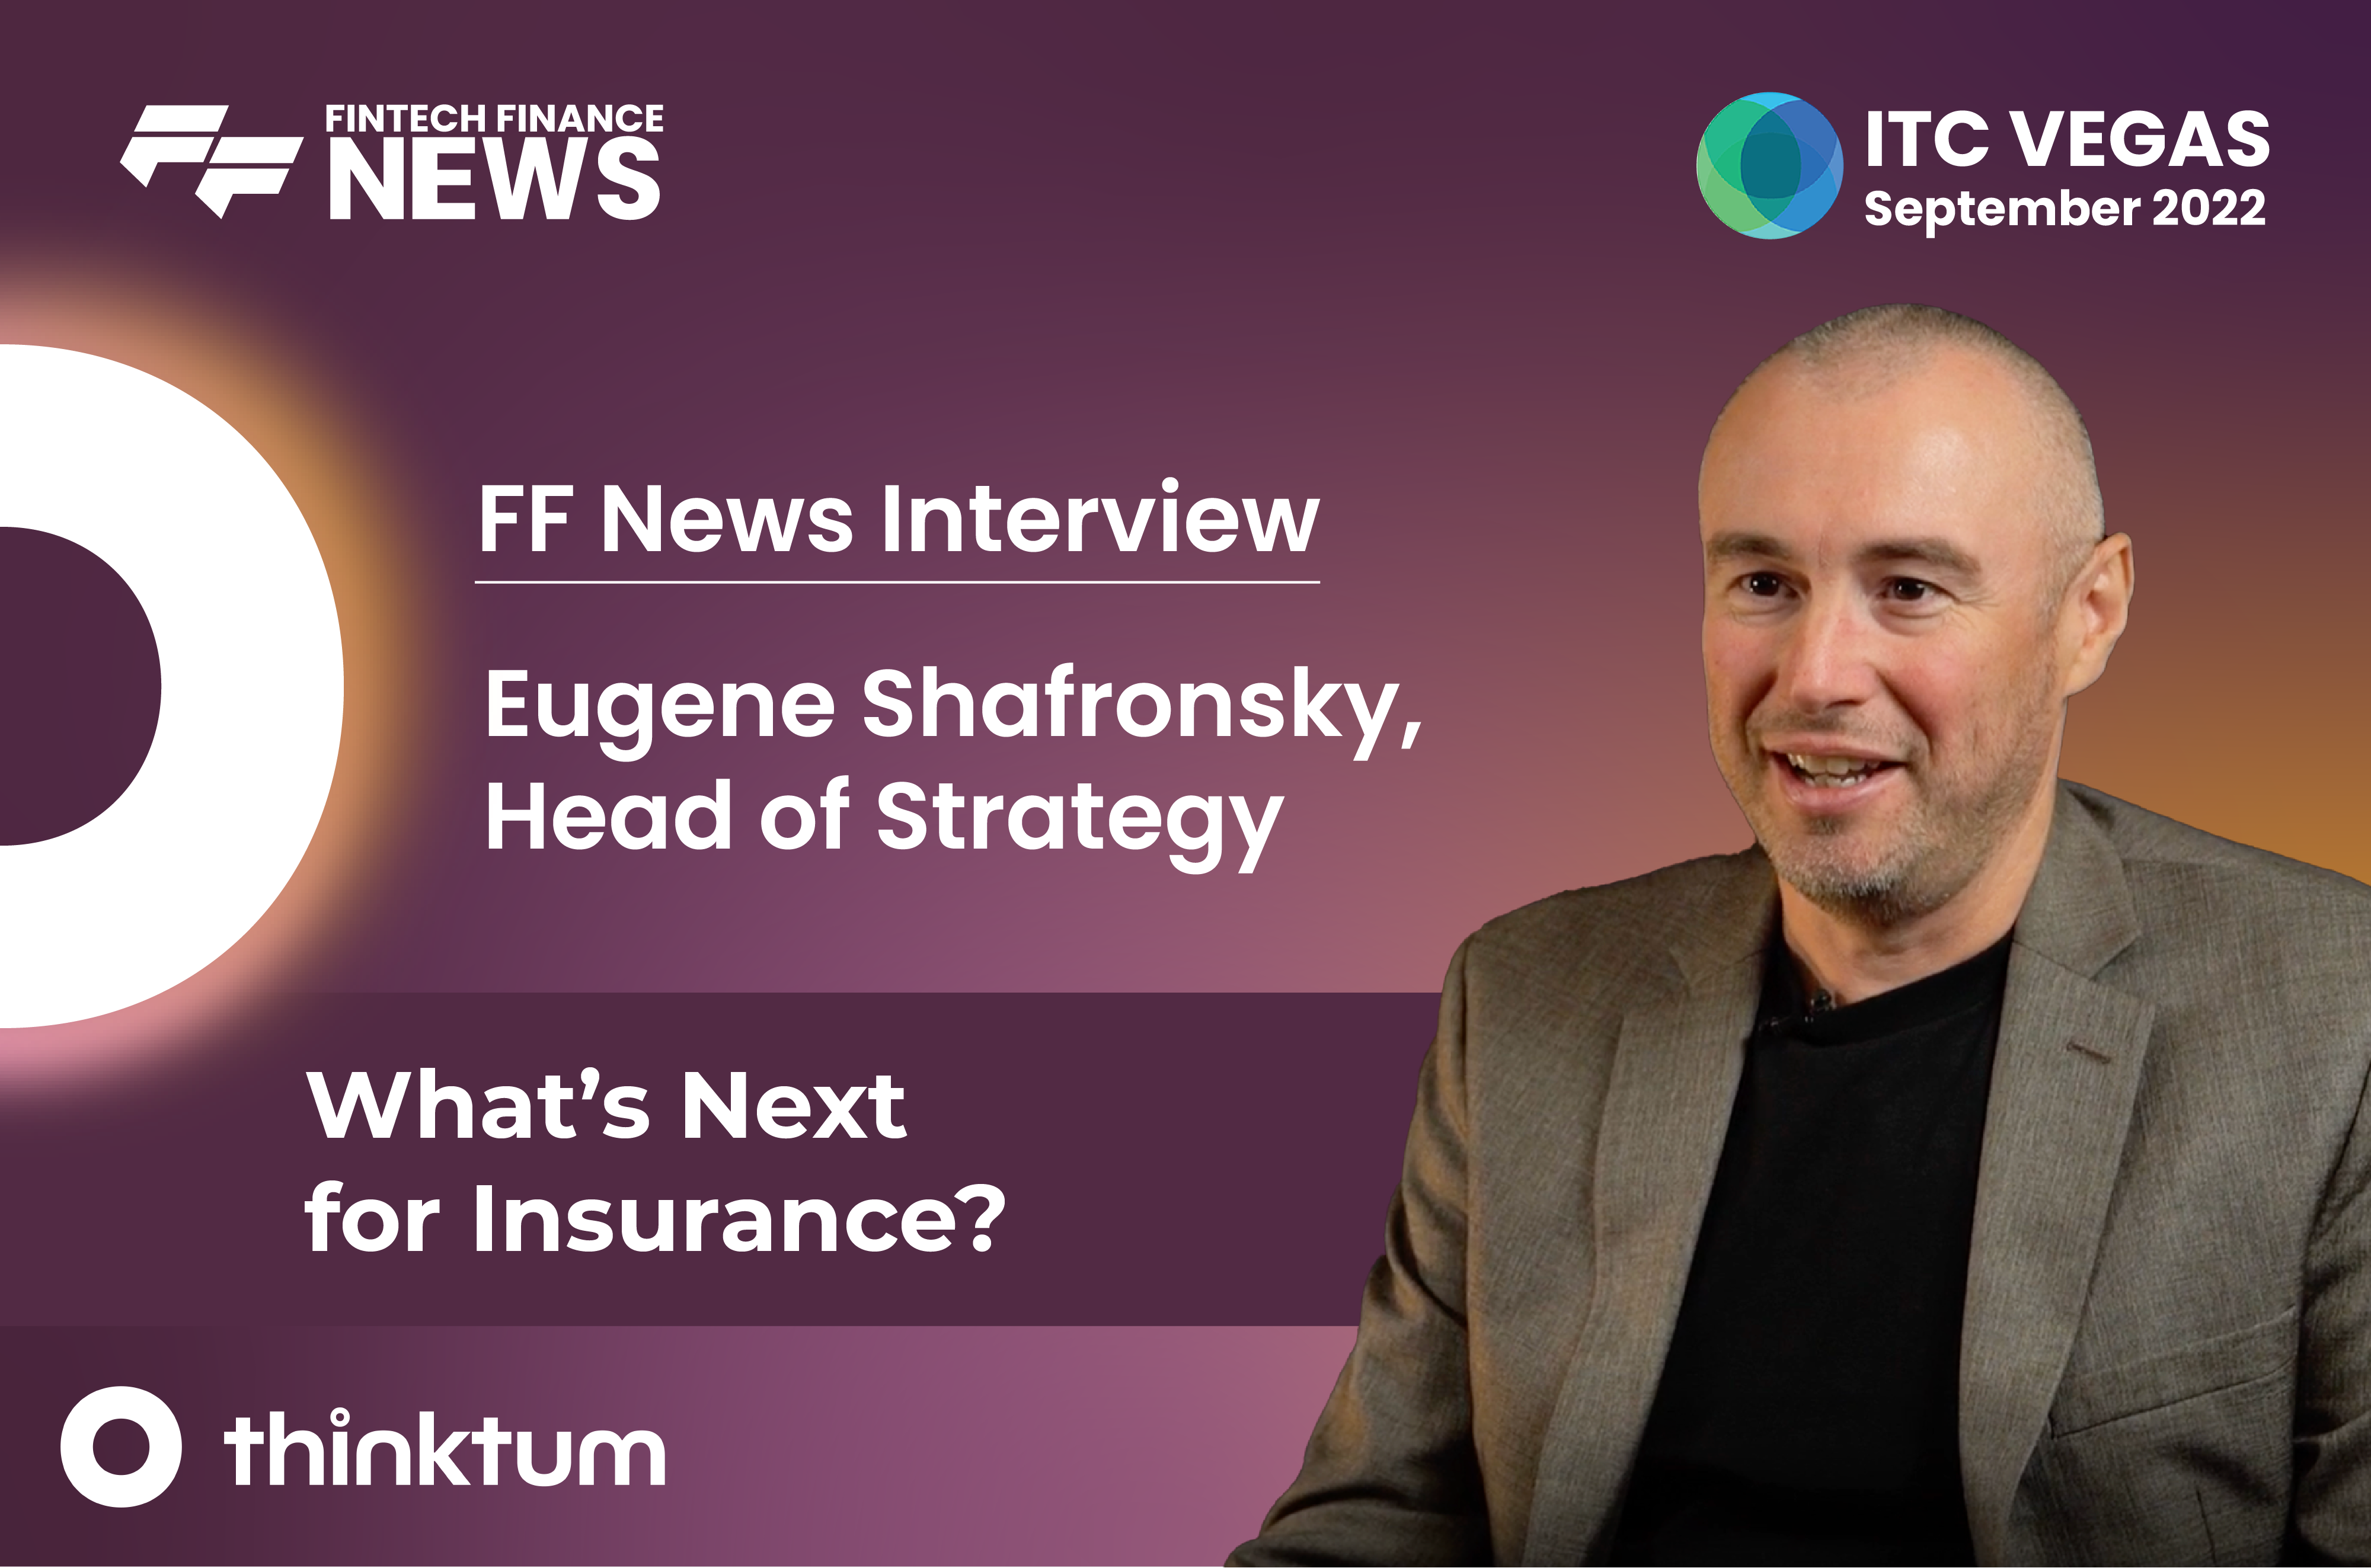 An ad for an interview with Eugene Shafronsky with FF News. Entitled What's Next for Insurance with the thinktum logo at the bottom.